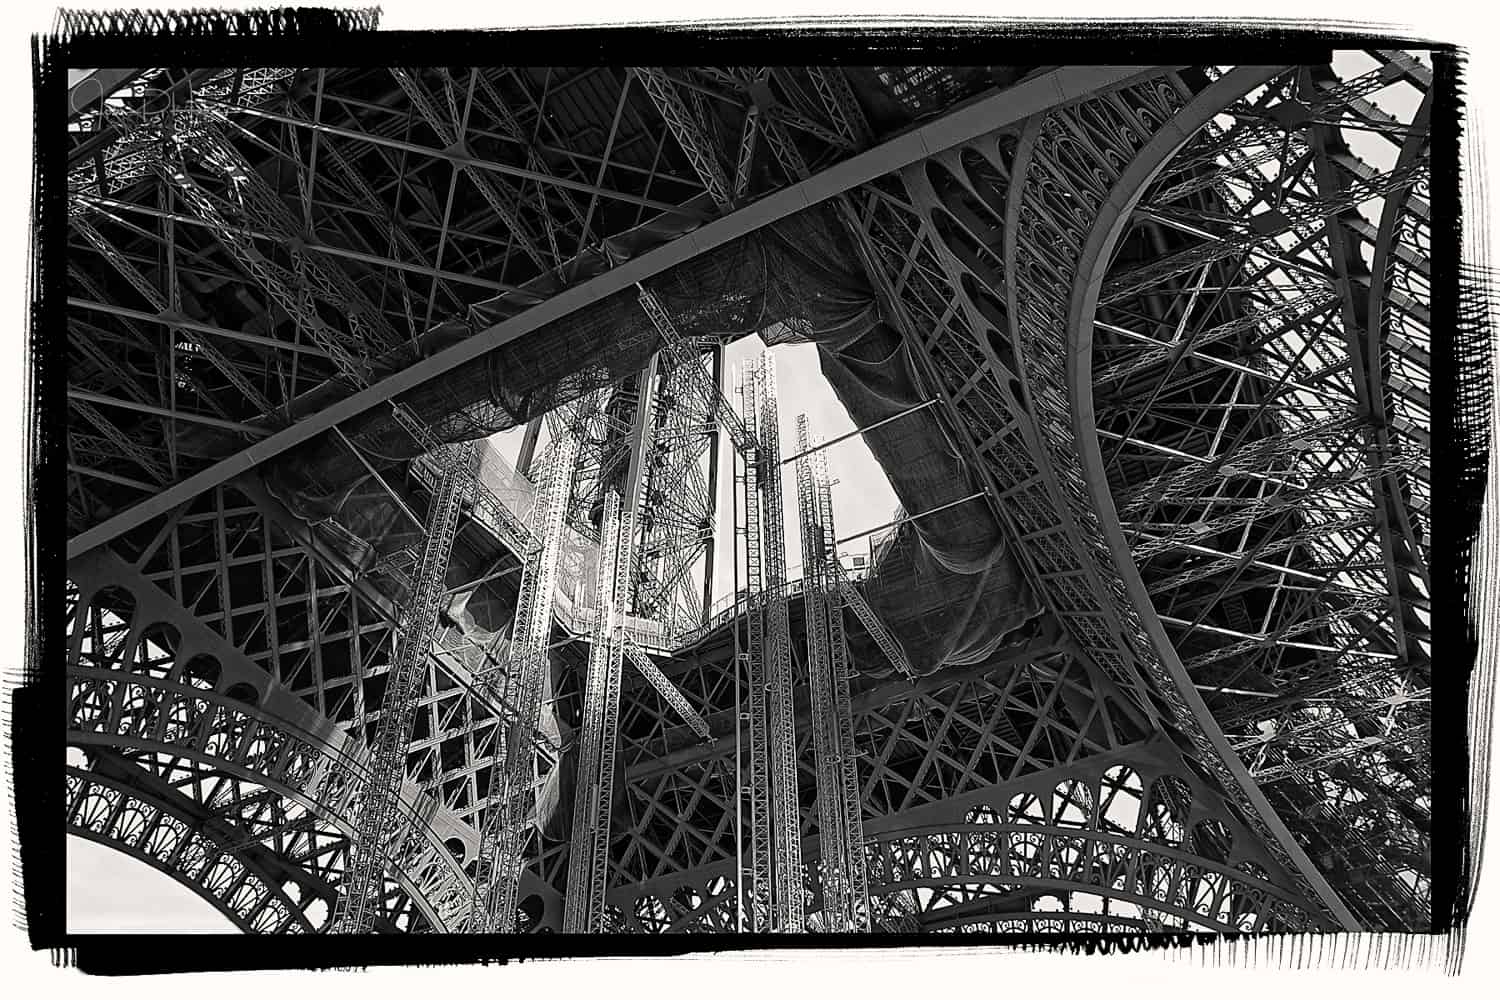 Black and White image of scaffolding during repairs and maintenance to the Eiffel Tower, Paris France